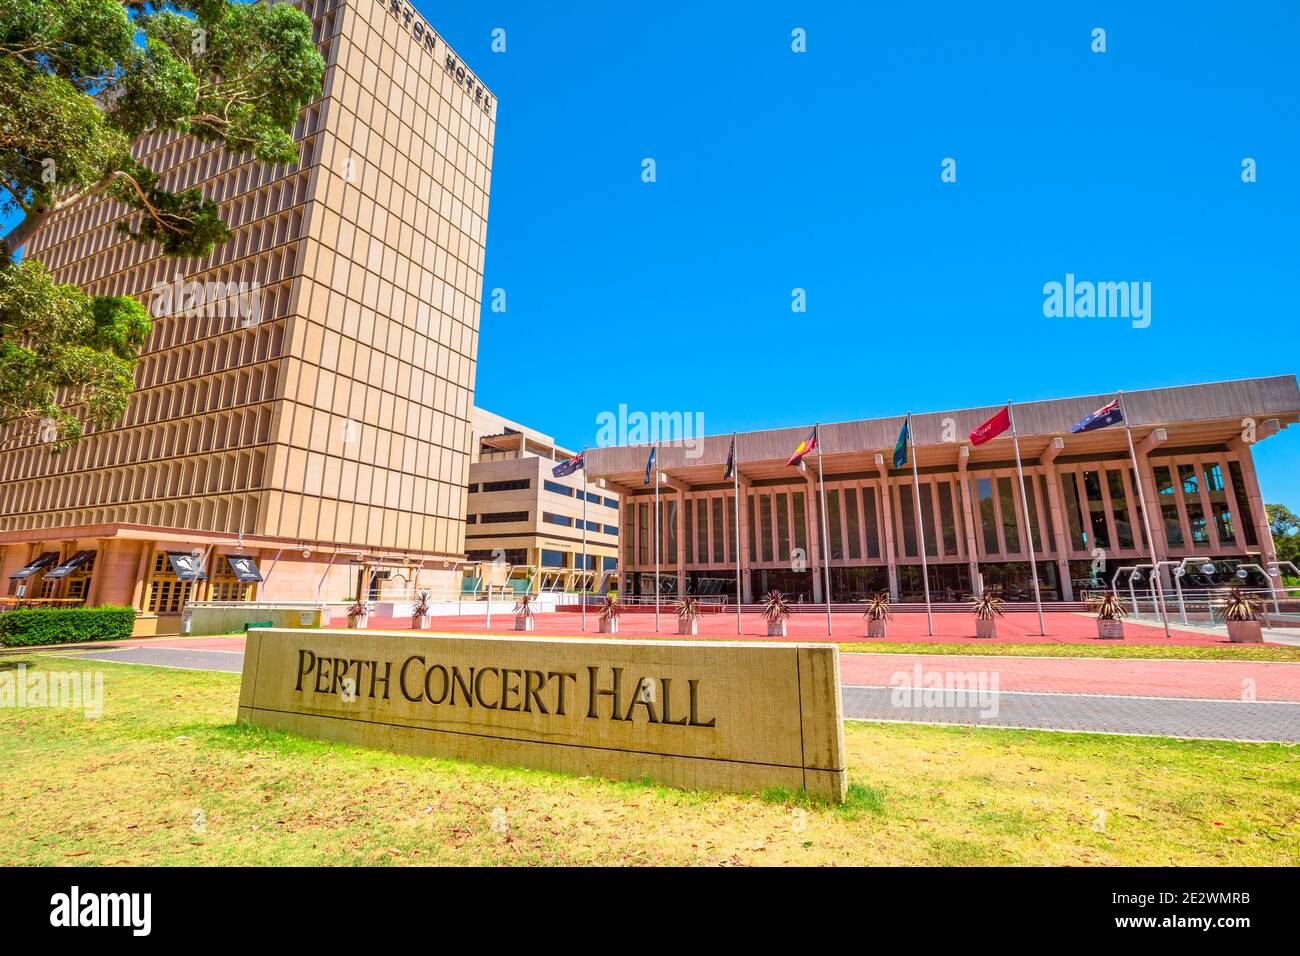 Perth, Western Australia - Jan 3, 2018: Perth Concert Hall, main venue of West Australian Symphony Orchestra. The building is located in Perth's Stock Photo